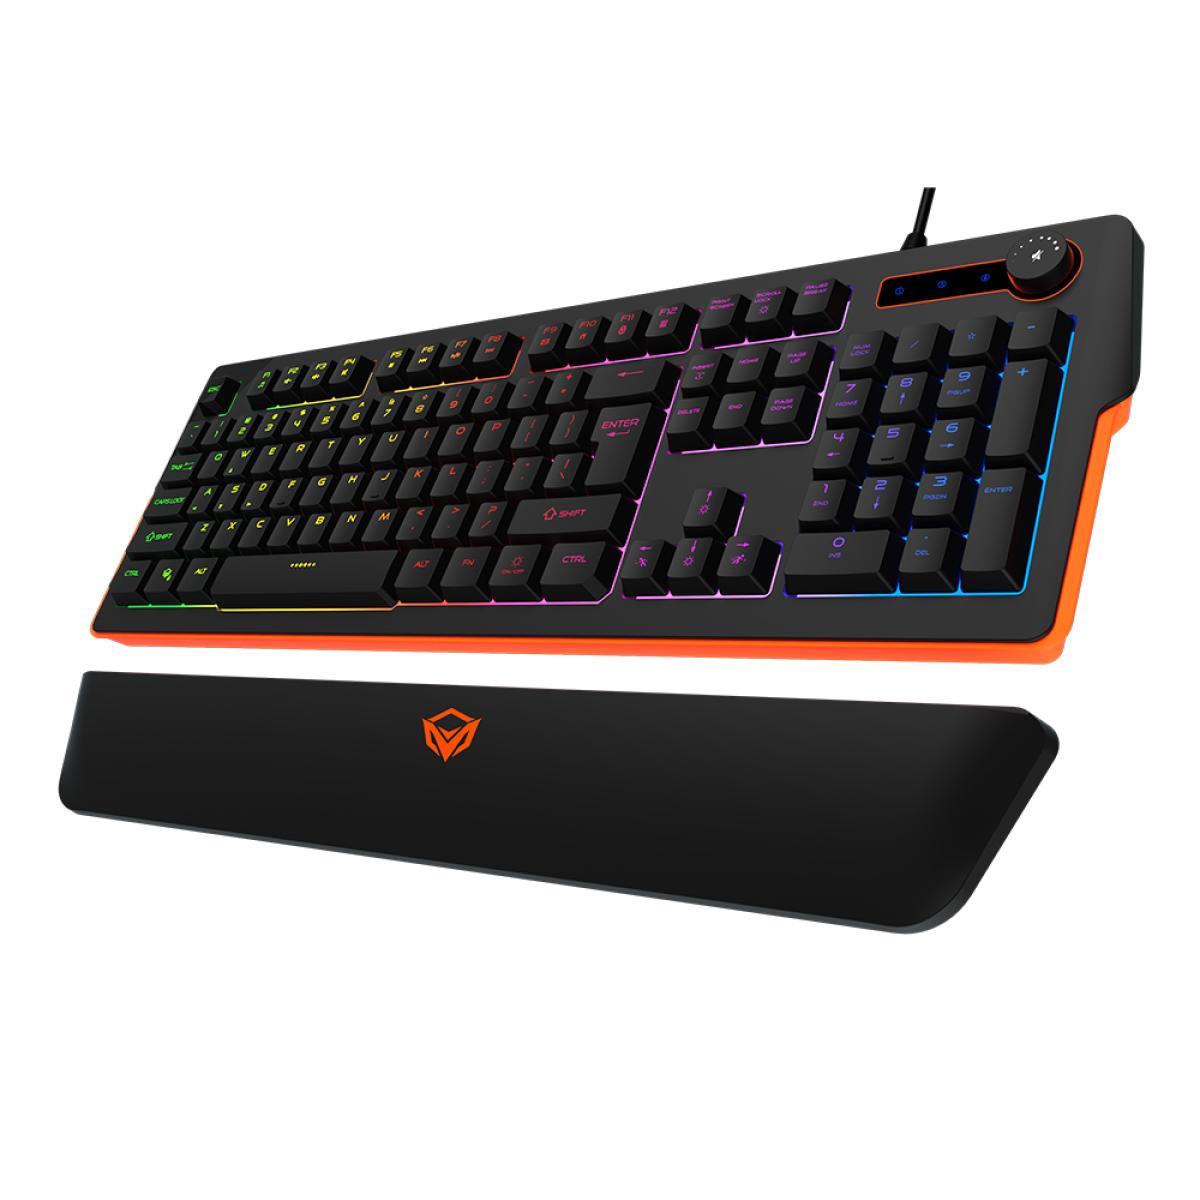 MeeTion RGB Magnetic Wrist Rest Keyboard for Gaming